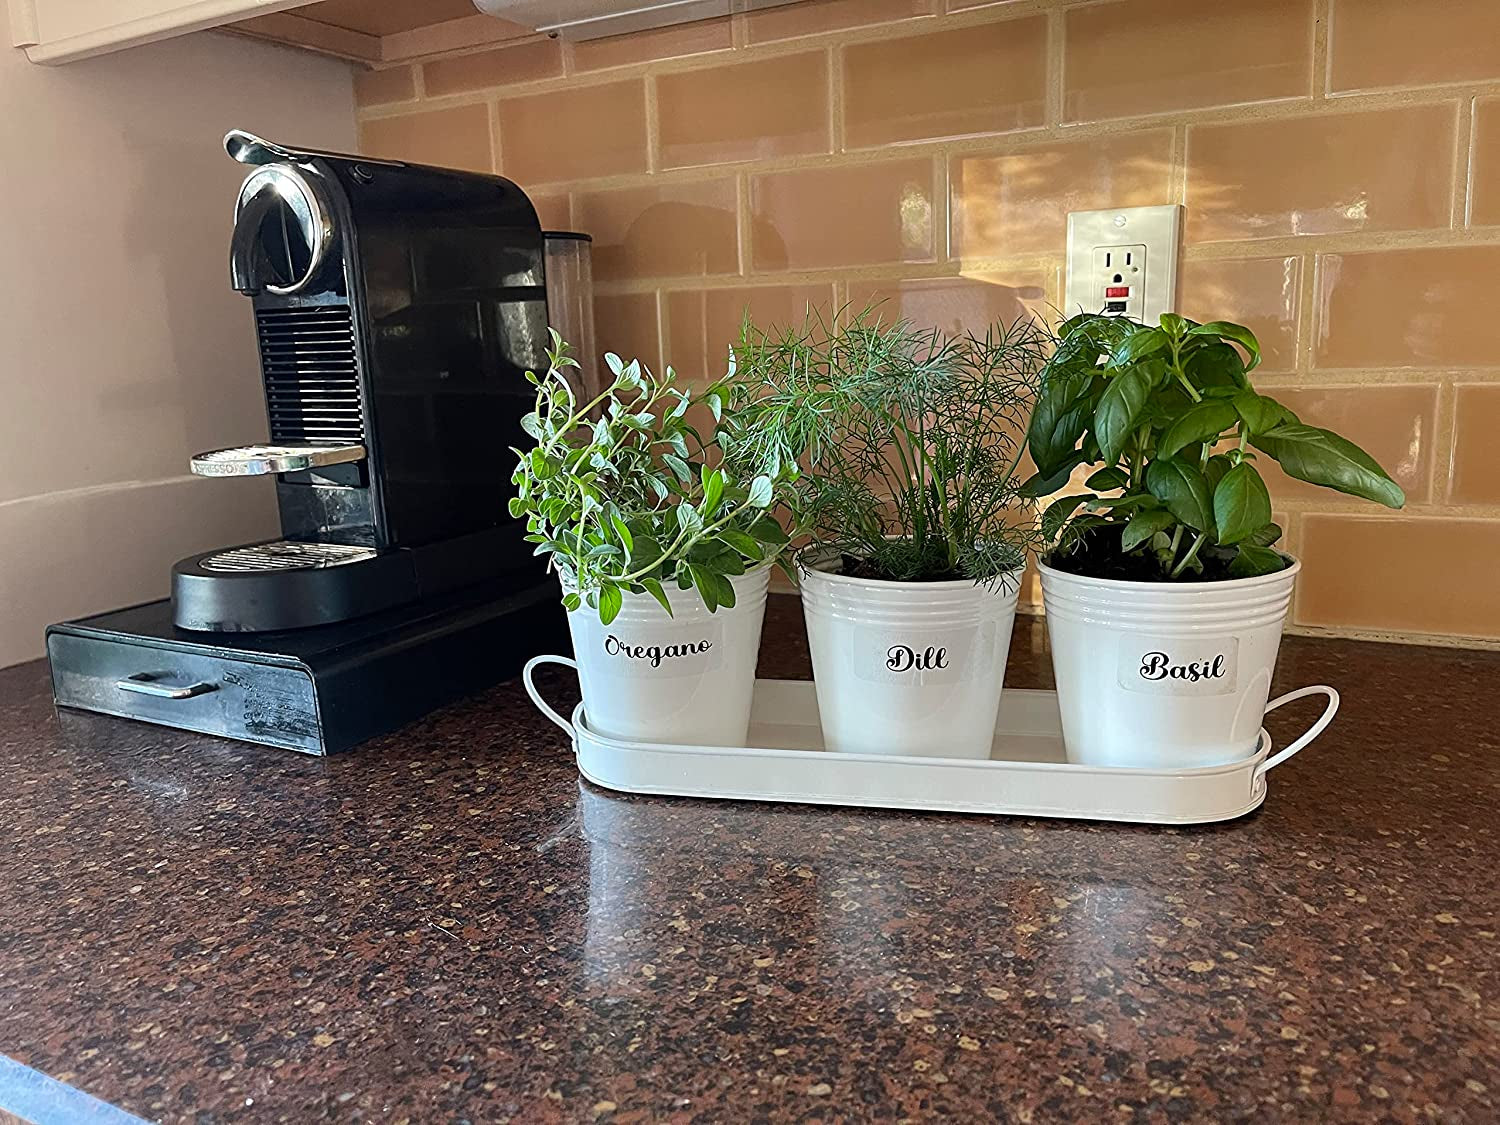 Herb Pot Planter Set with Tray for Indoor Garden or Outdoor Use, White Metal Succulent Potted Planters for Kitchen Windowsill